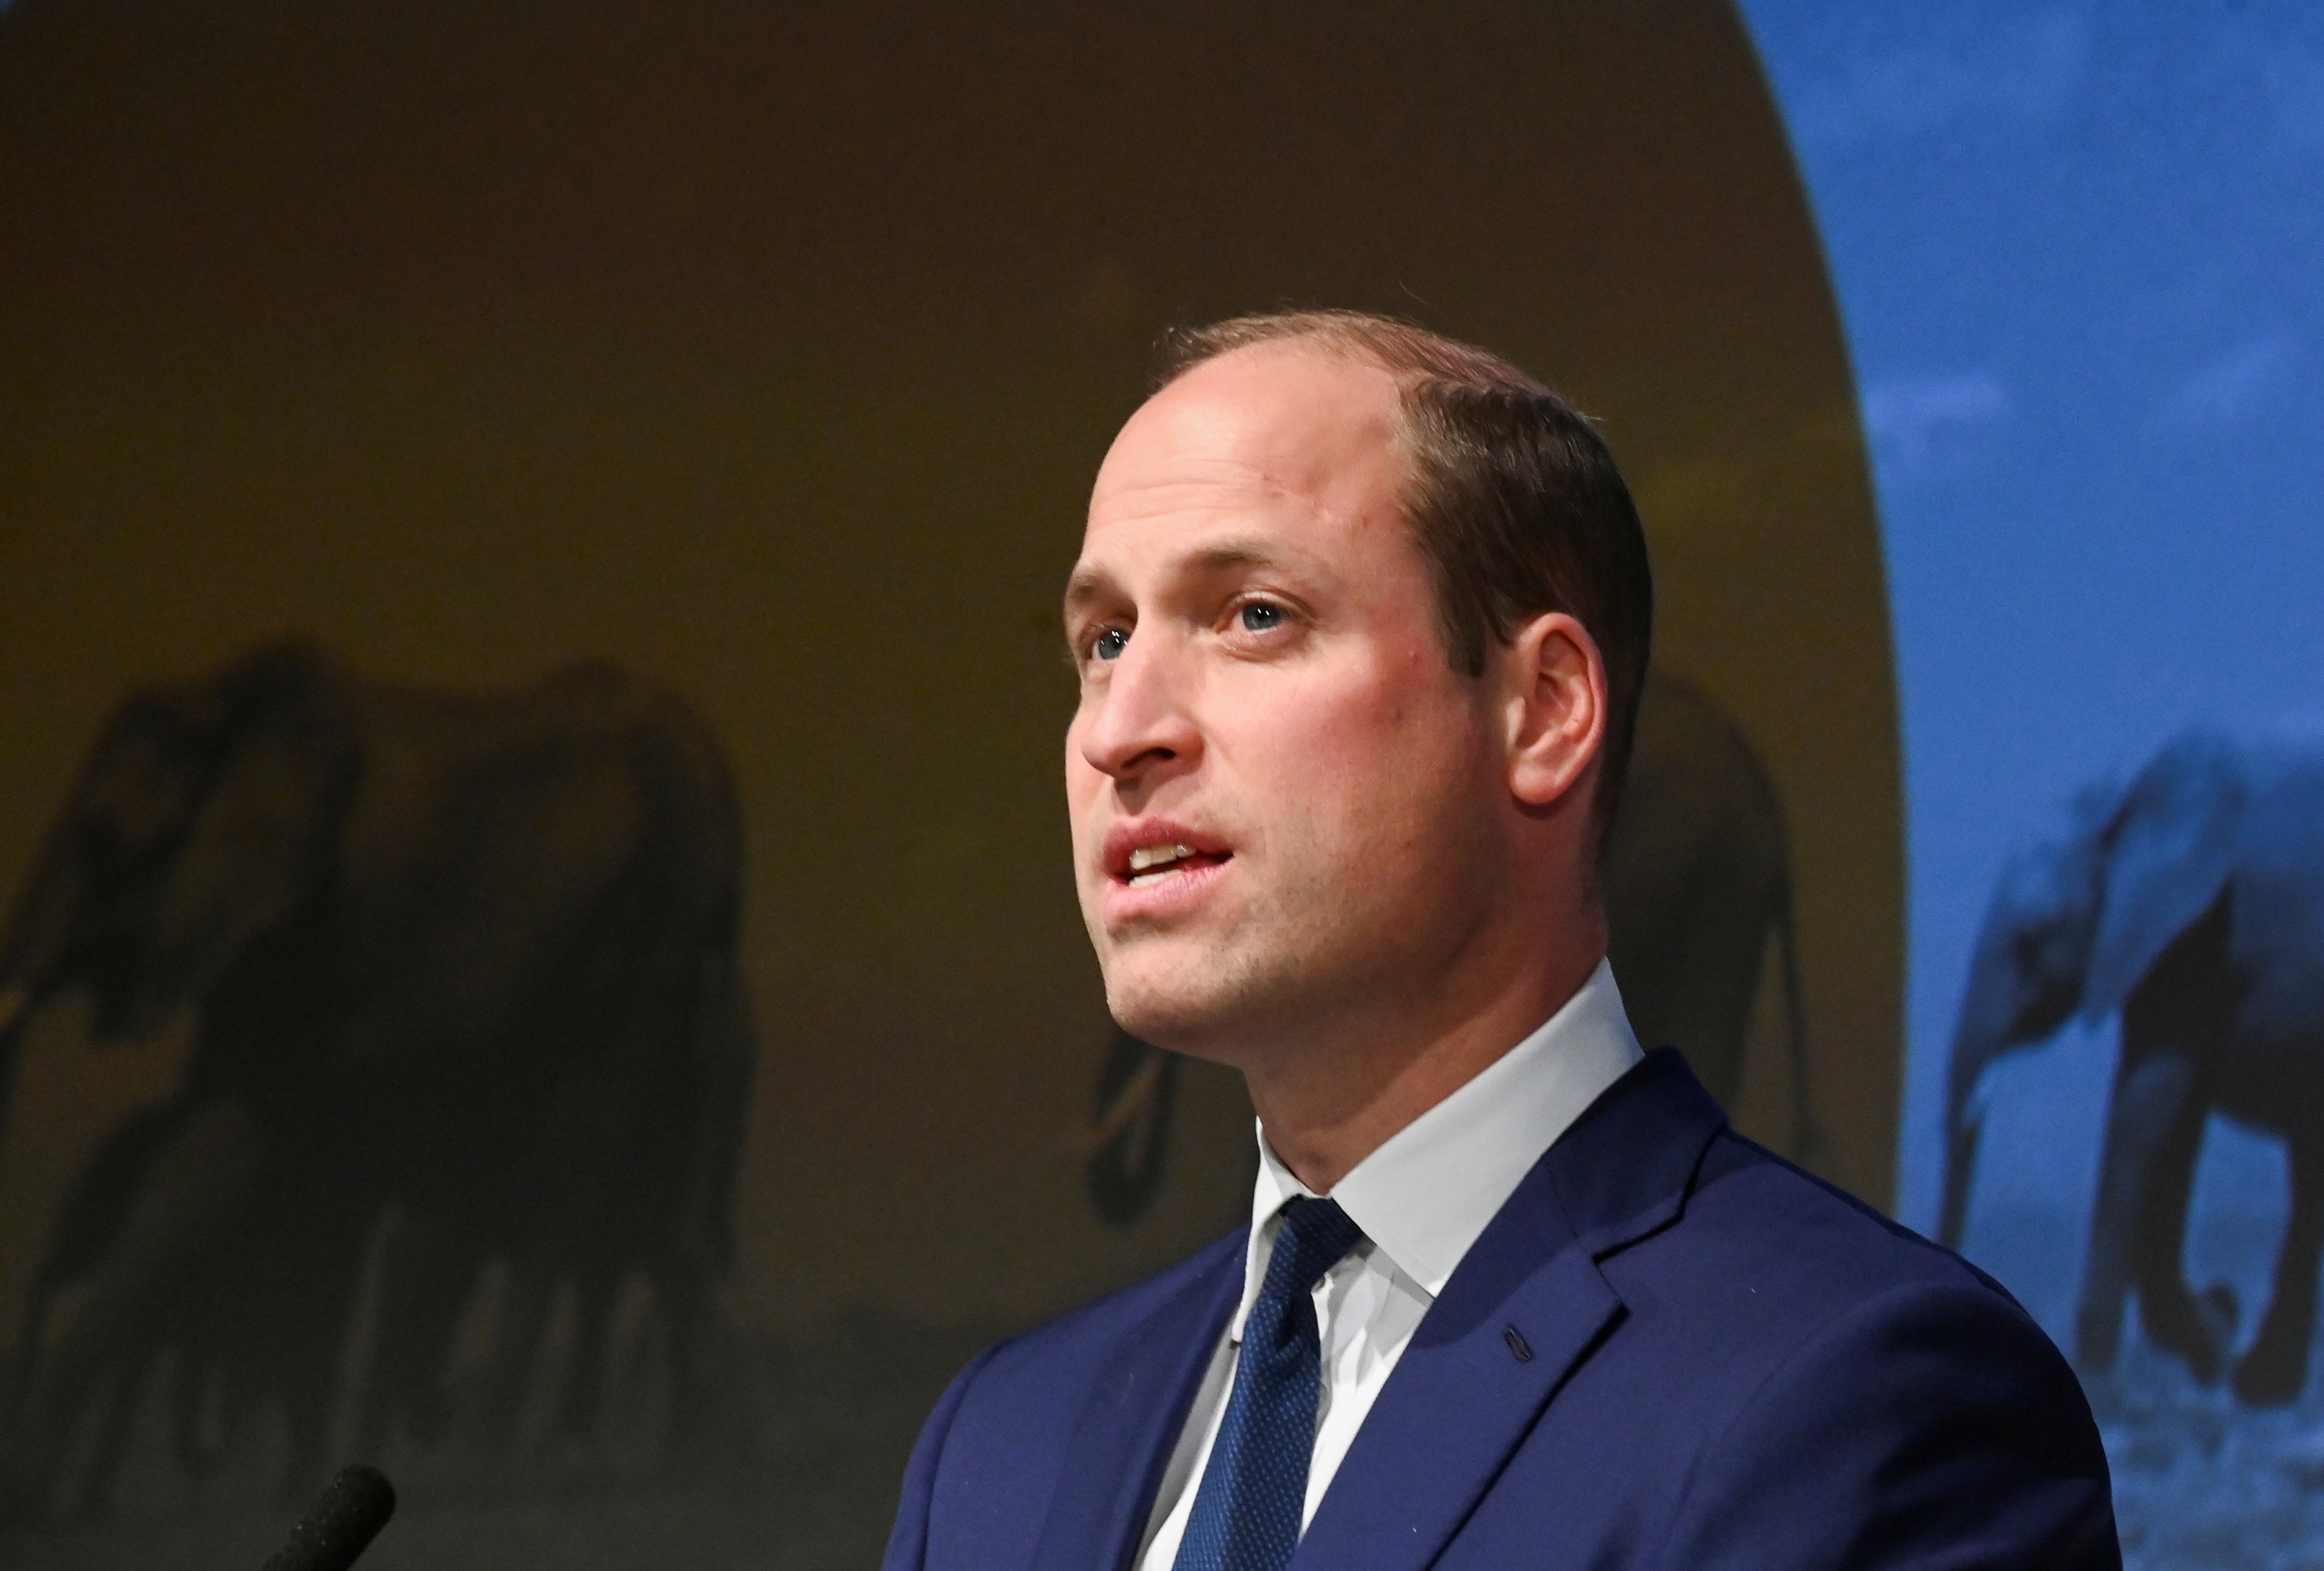 The Duke of Cambridge has recorded an audio walking tour around the Queen’s Sandringham estate to encourage the public to get active for their mental health (Toby Melville/PA)